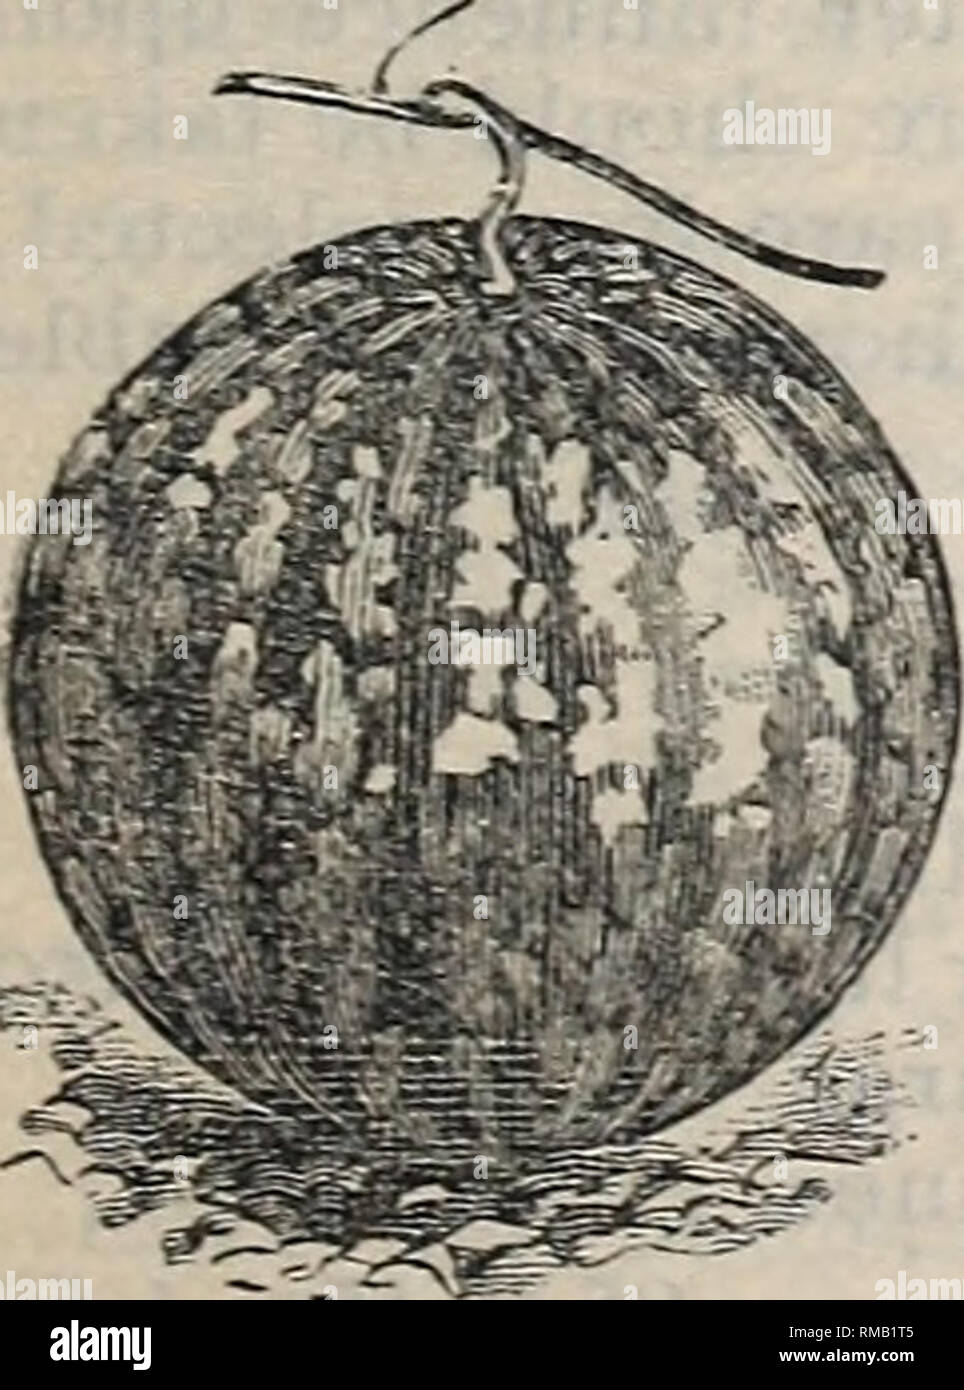 . Annual illustrated catalogue of seeds. Vegetables Seeds Catalogs; Flowers Seeds Catalogs; Gardening Equipment and supplies Catalogs; Commercial catalogs Ohio Cleveland. BLACK SPANISH. Mammoth Iron Clad.—A monstrous striped oblong melon, having a rind of such remarkable strength and impenetrability as to render it perfectly &quot;Iron Clad,&quot; hence the best shipper produced to date. Flesh red, sweet, tender, crisp and juicy. Heart very large. The keeping qualities of this melon are remarkable. Whether plucked or left upon the vines, they remain perfectly fresh fully one month after ripeni Stock Photo